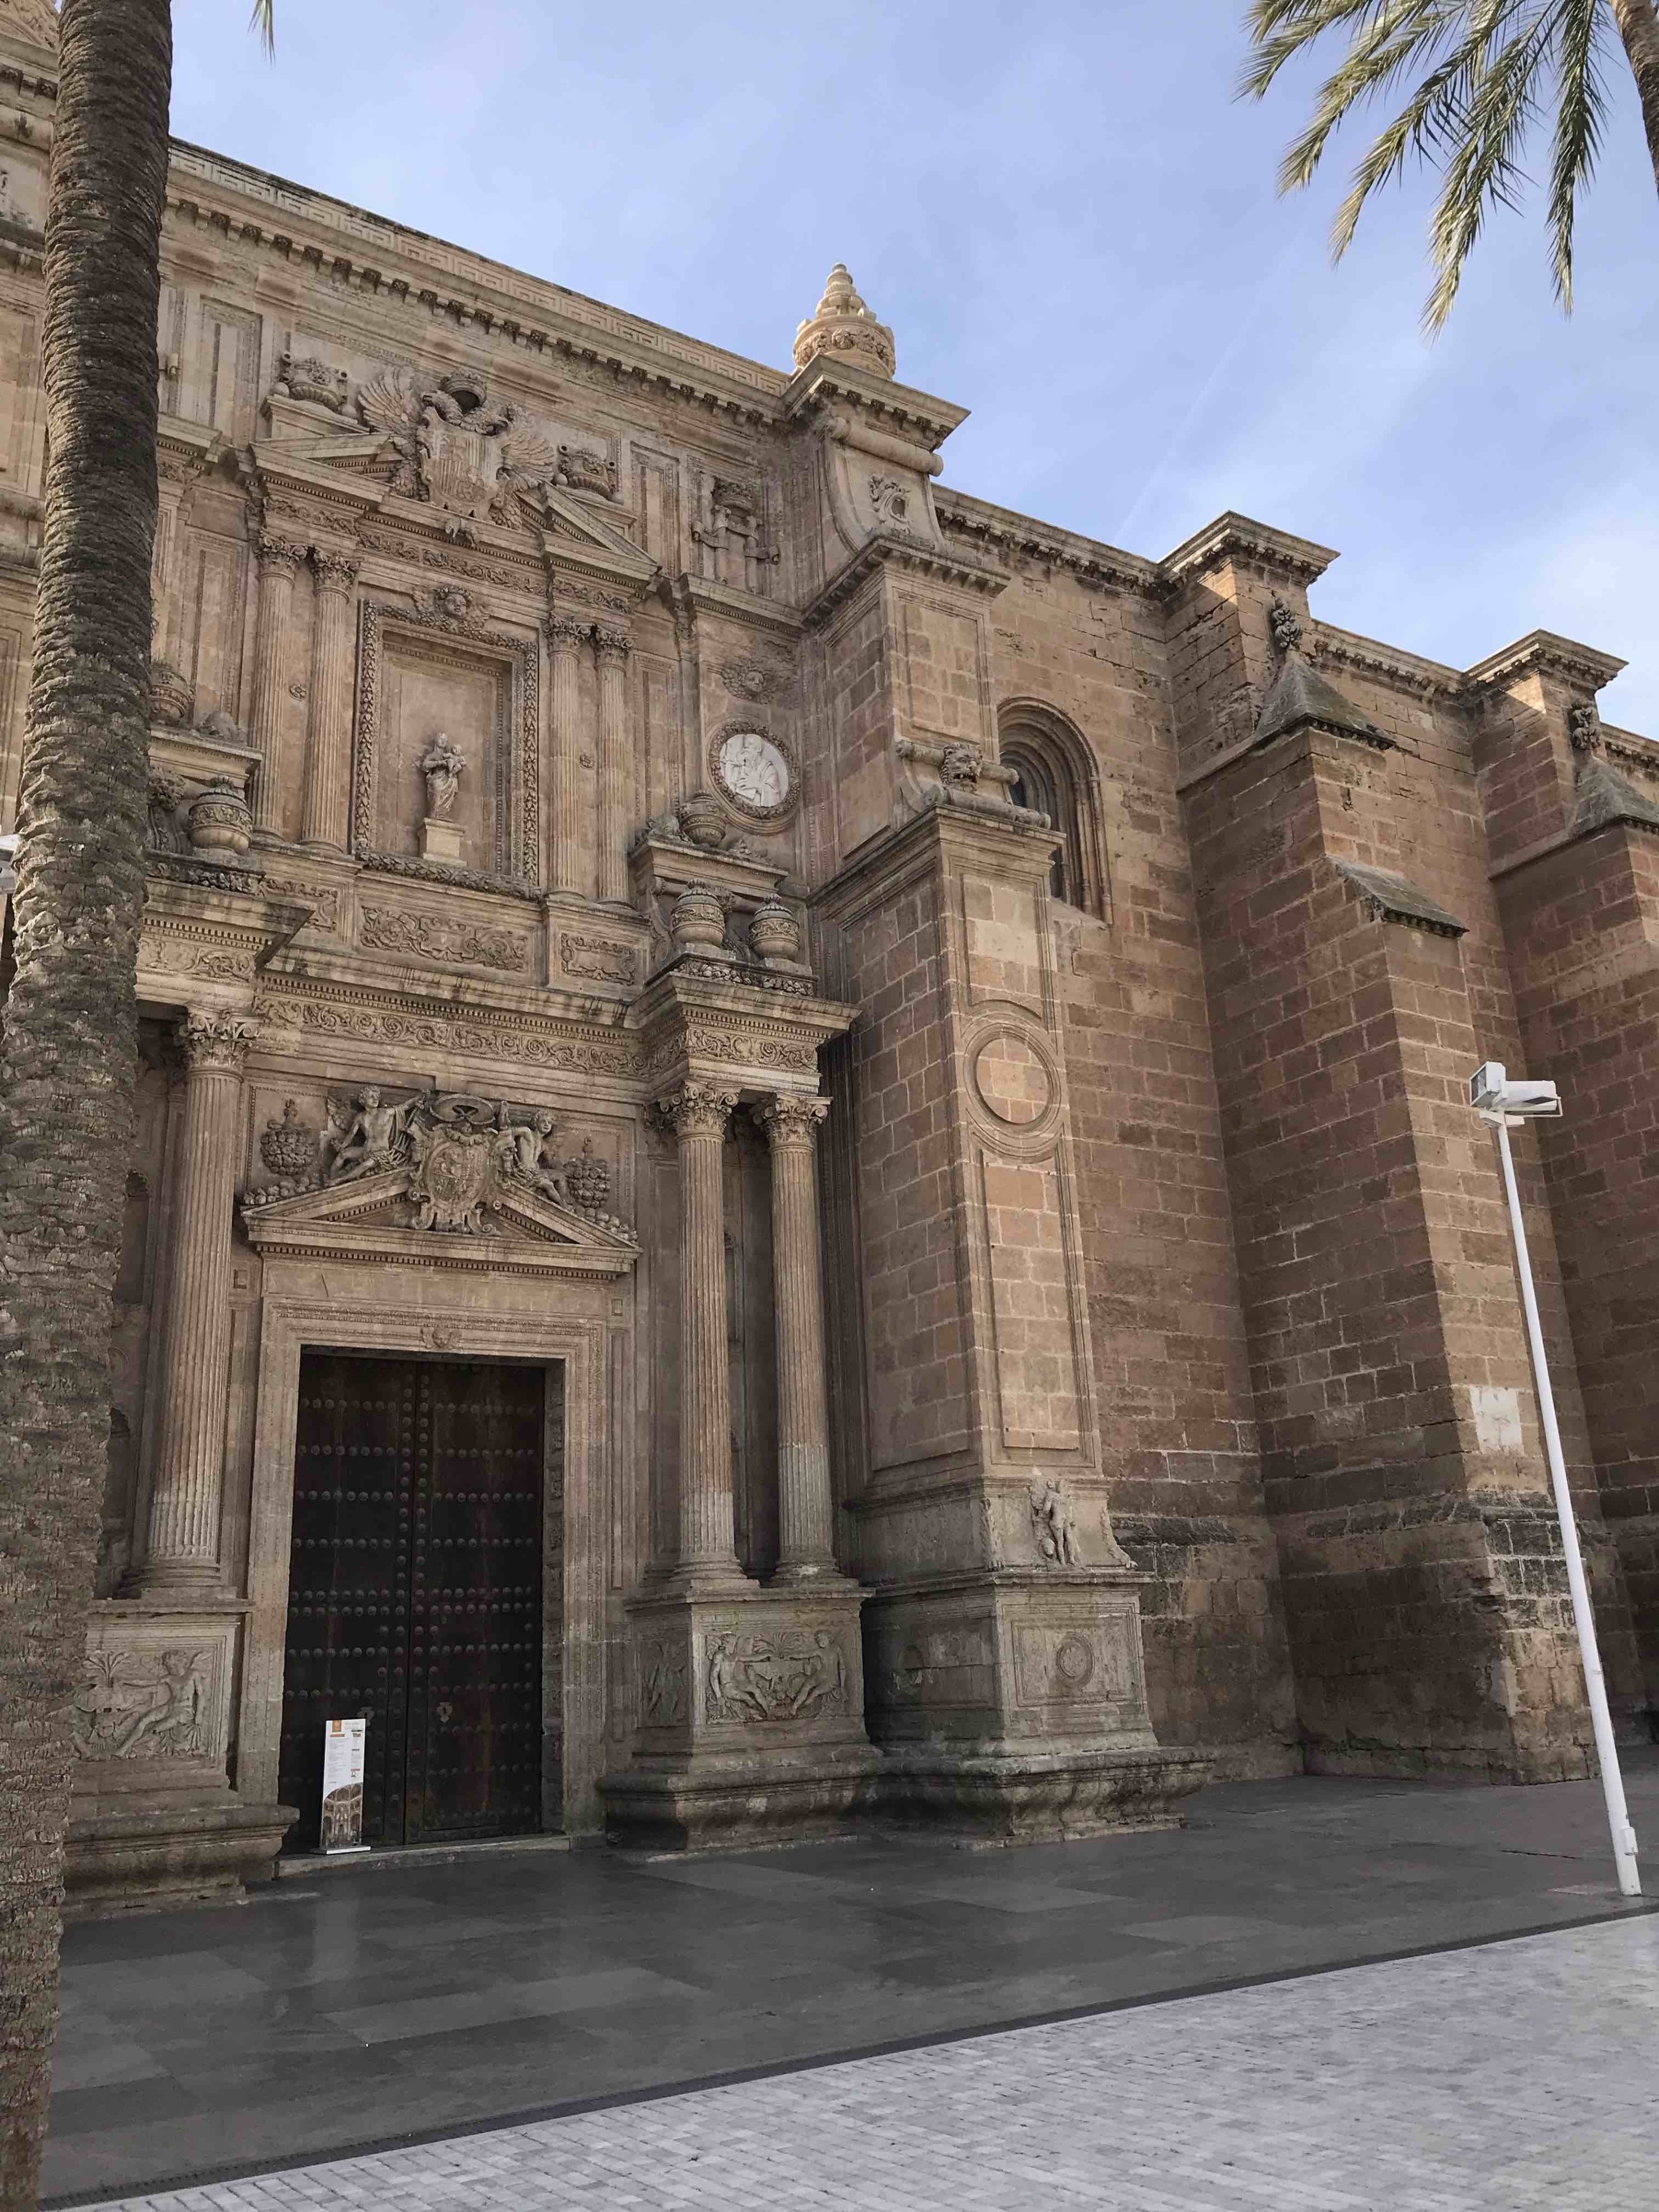 This is the impressive Cathedral in Almeria.